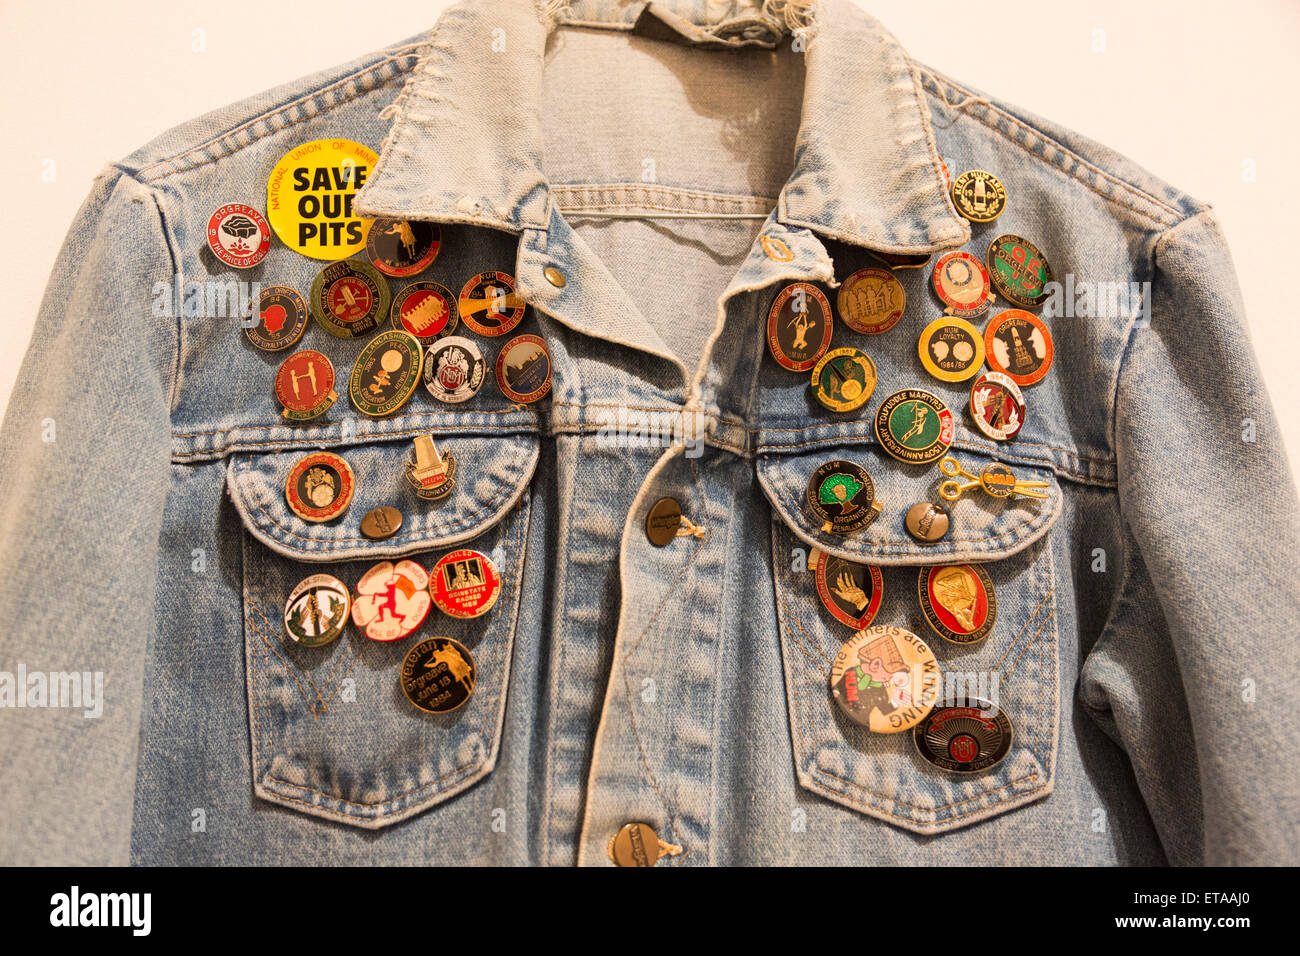 London, UK. 8 June 2015. Pictured: a jeans jacket with memorabilia badges. The Battle of Orgreave Archive (An Injury to One is an Injury to All) (2001), by Jeremy Deller. Press preview of the new Tate Britain exhibition 'Fighting History' which opens to the public on 9 June 2015 and will run until 13 September 2015. 'Fighting History' celebrates the enduring significance and emoptional power of British history painting from Ancient Rome to the Poll Tax Riots. Juxtaposing work from different periods, the exhibition explores how artists have reacted to historical events and how they capture and Stock Photo